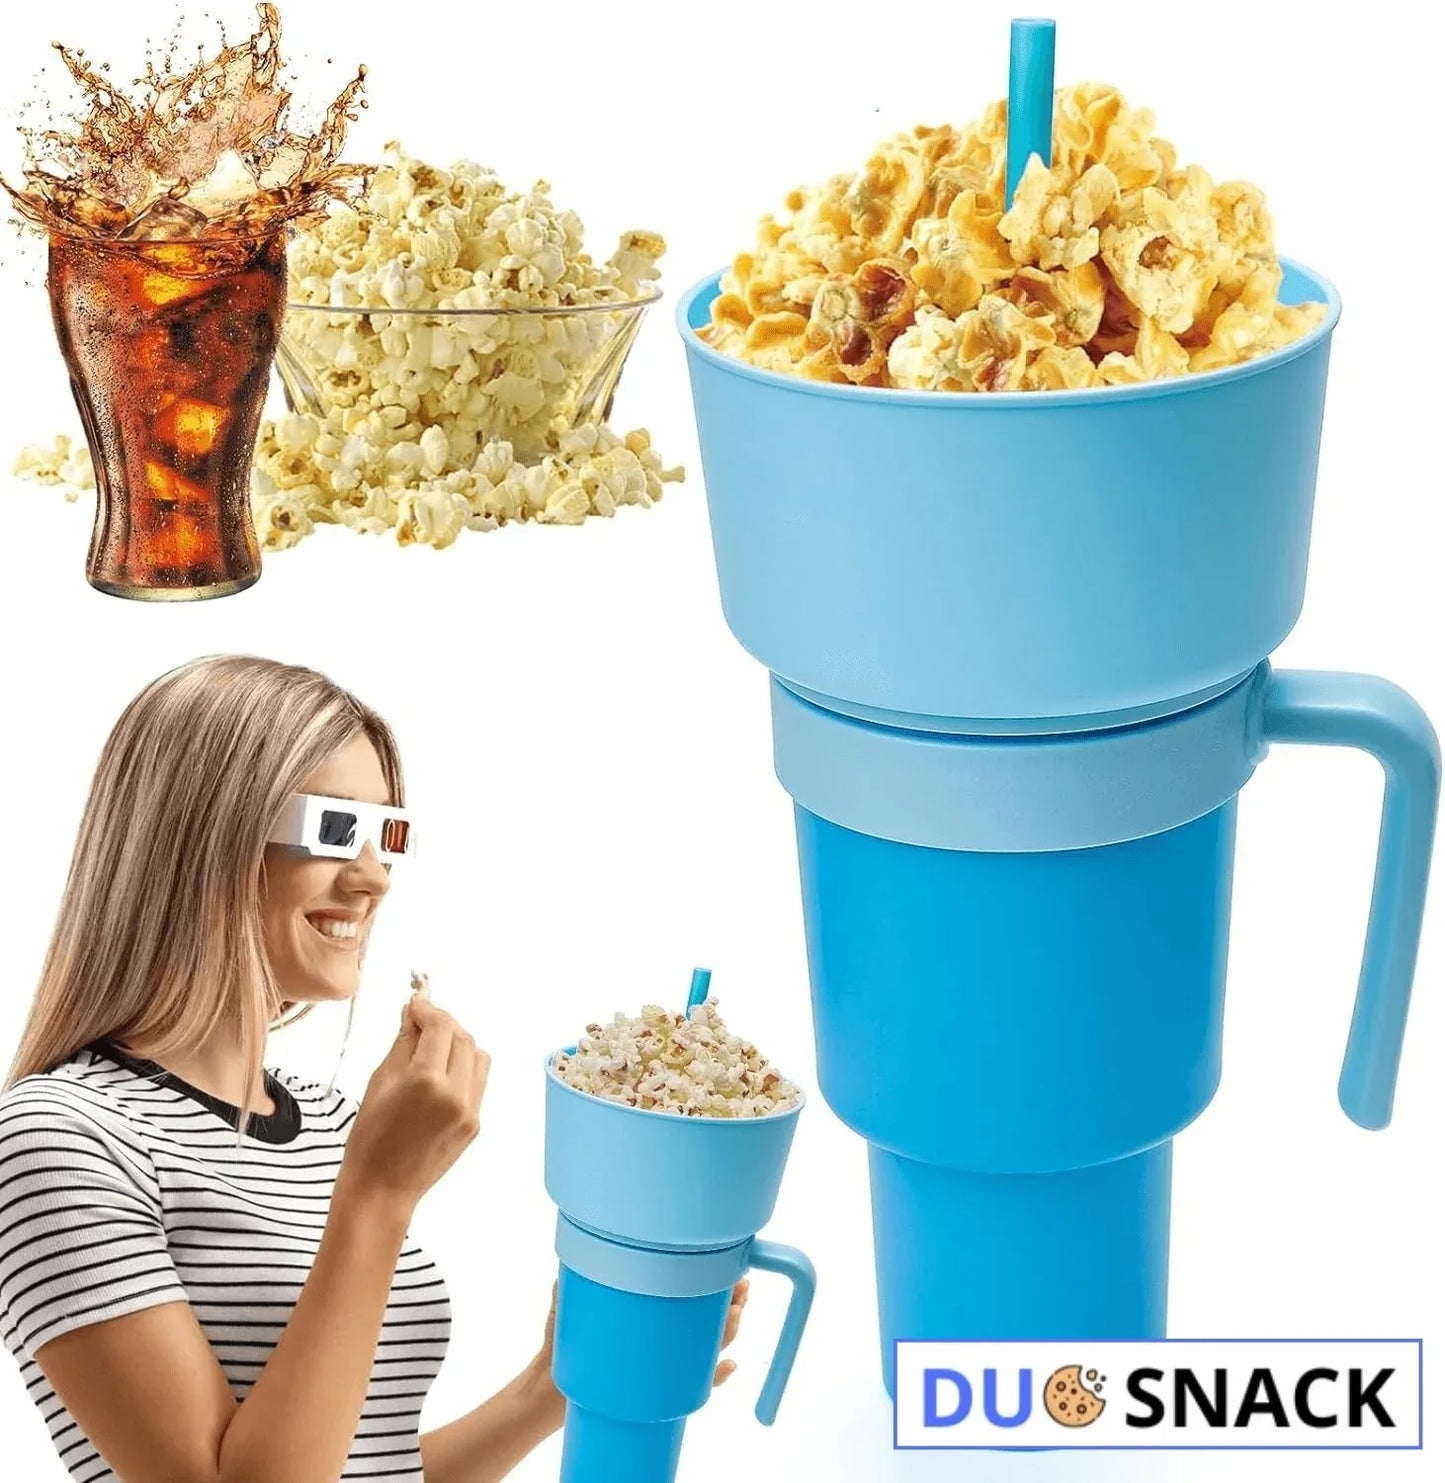 Duosnack 2 in 1